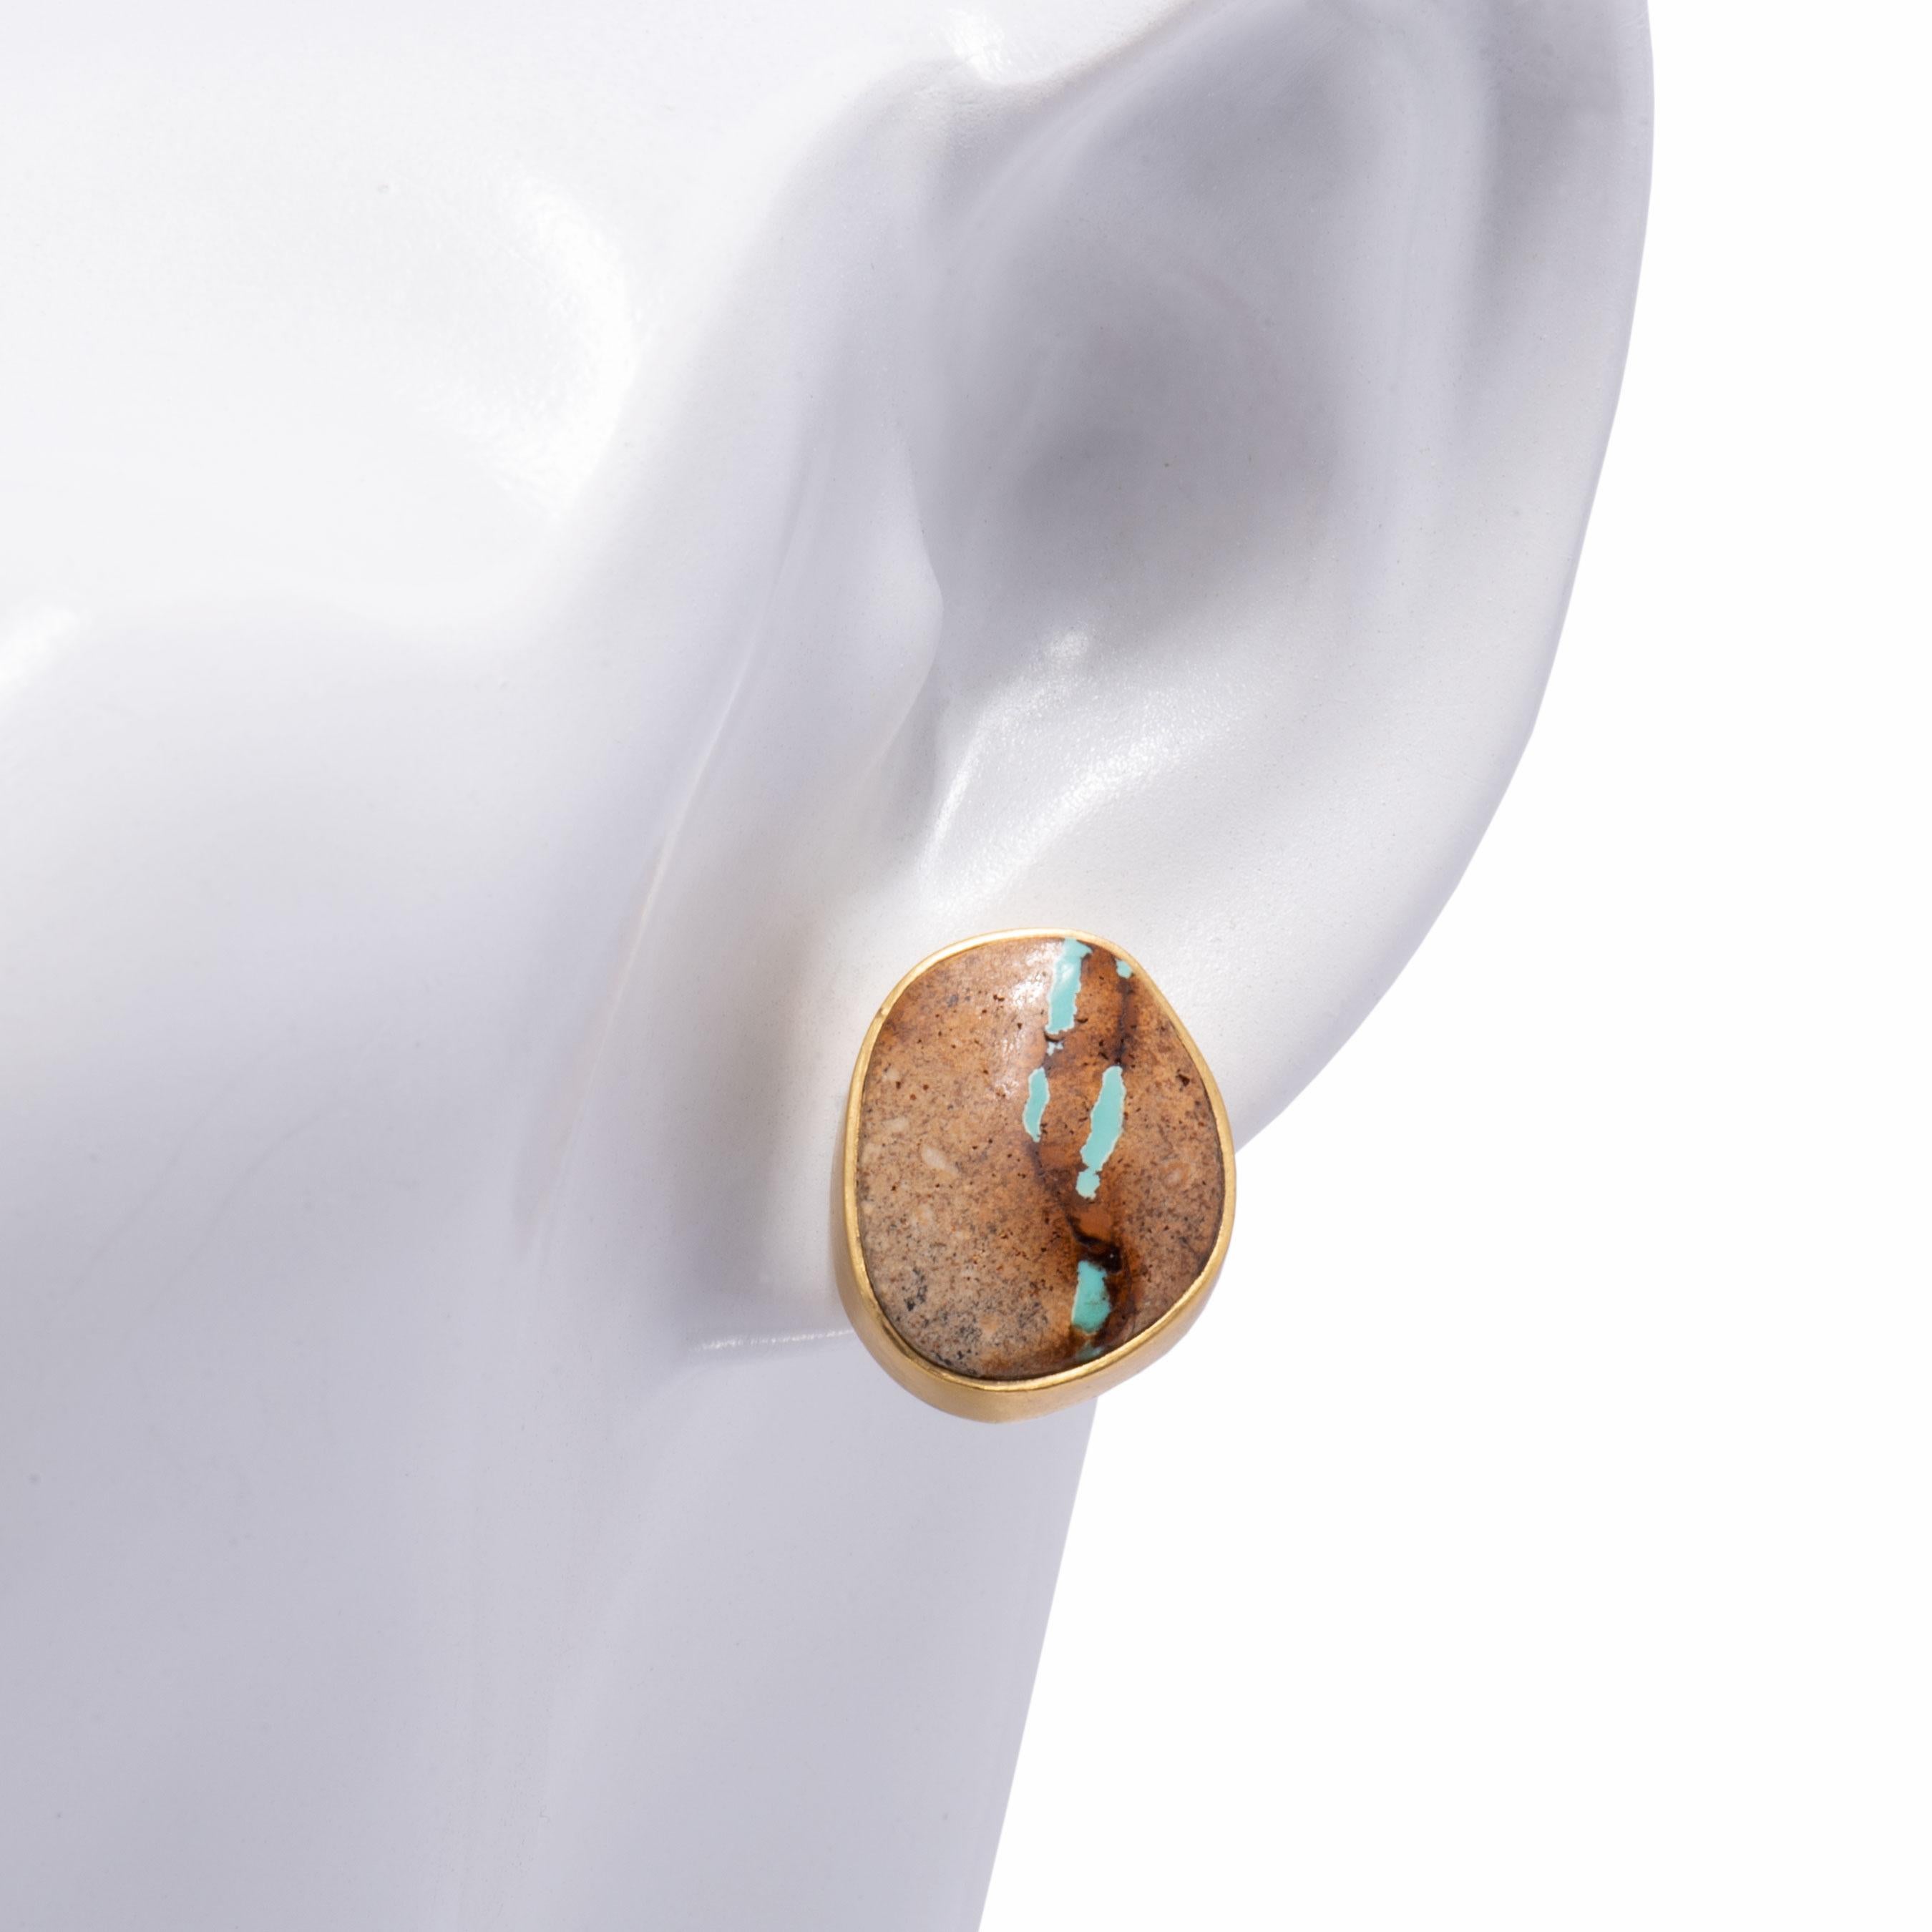 Boulder Turquoise Stud Earrings in 22 Karat Gold In New Condition For Sale In Santa Fe, NM